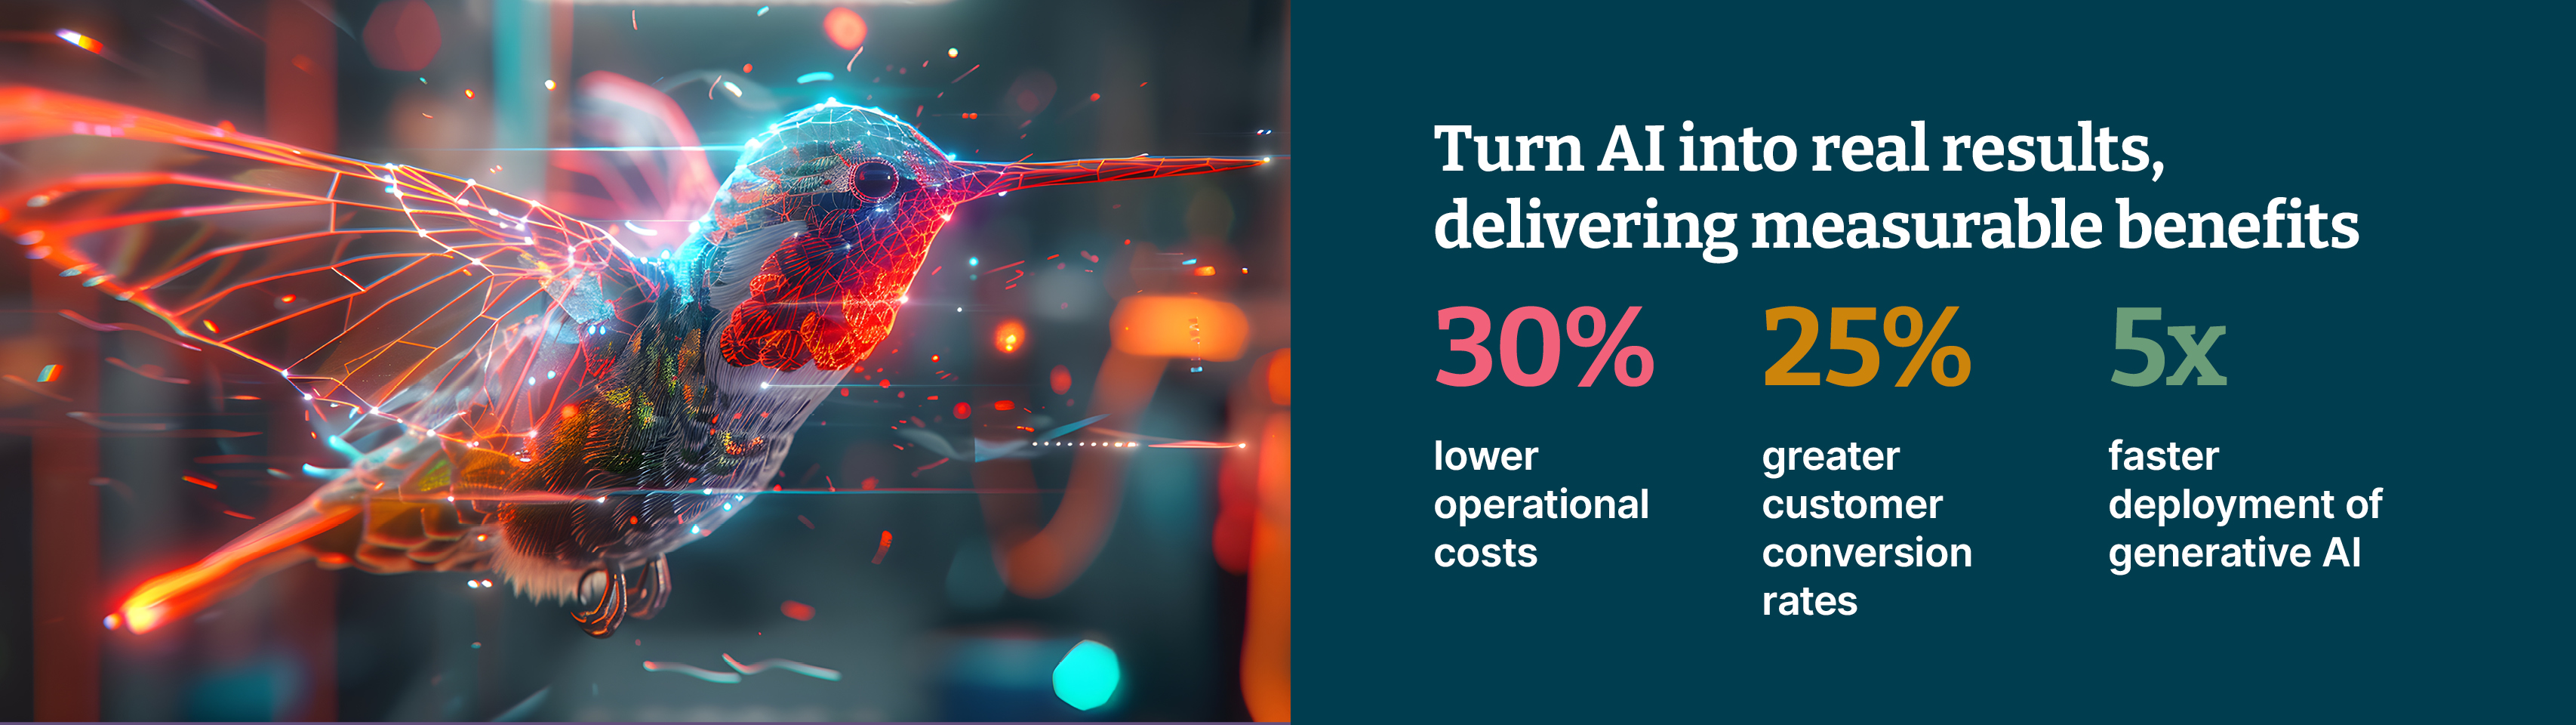 Ai generated humming bird flying and Turn AI into real results delivering measurable benefits,- 30% lower operational costs, 25% greater customer conversion rates, 5x faster deployment of generative AI